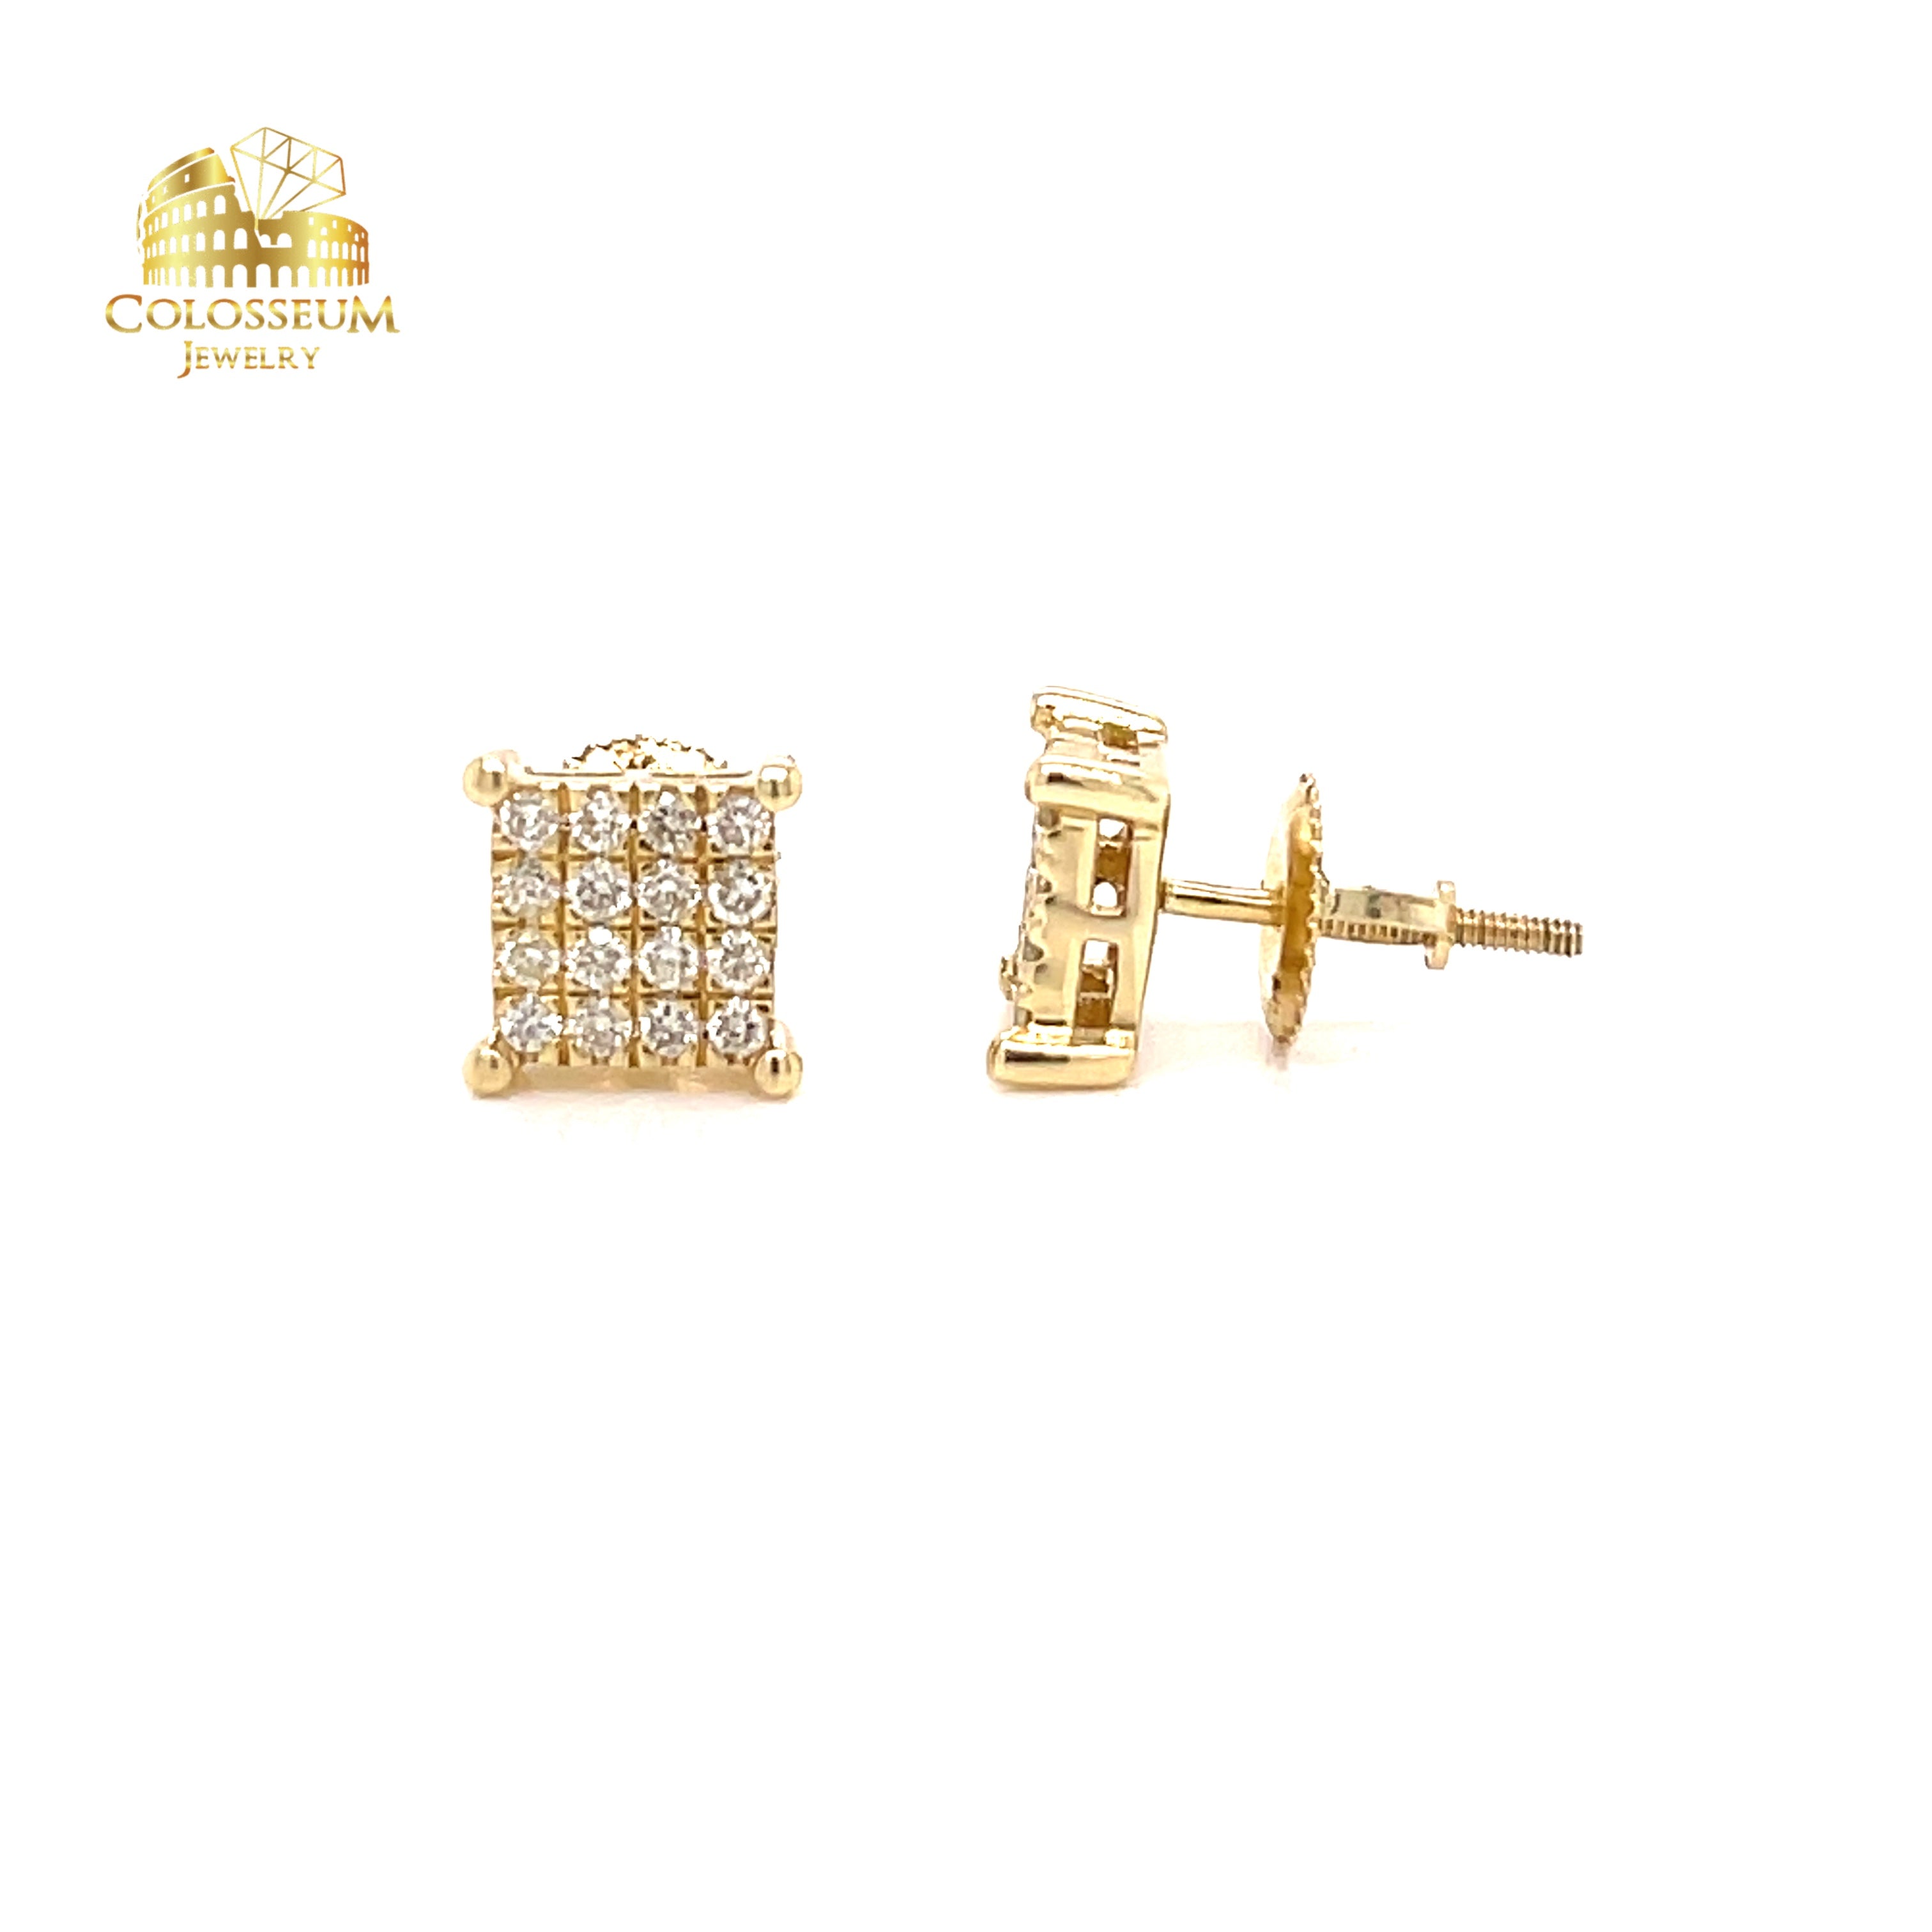 10K Yellow Gold Square Diamond Cluster Earrings - 0.39ctw